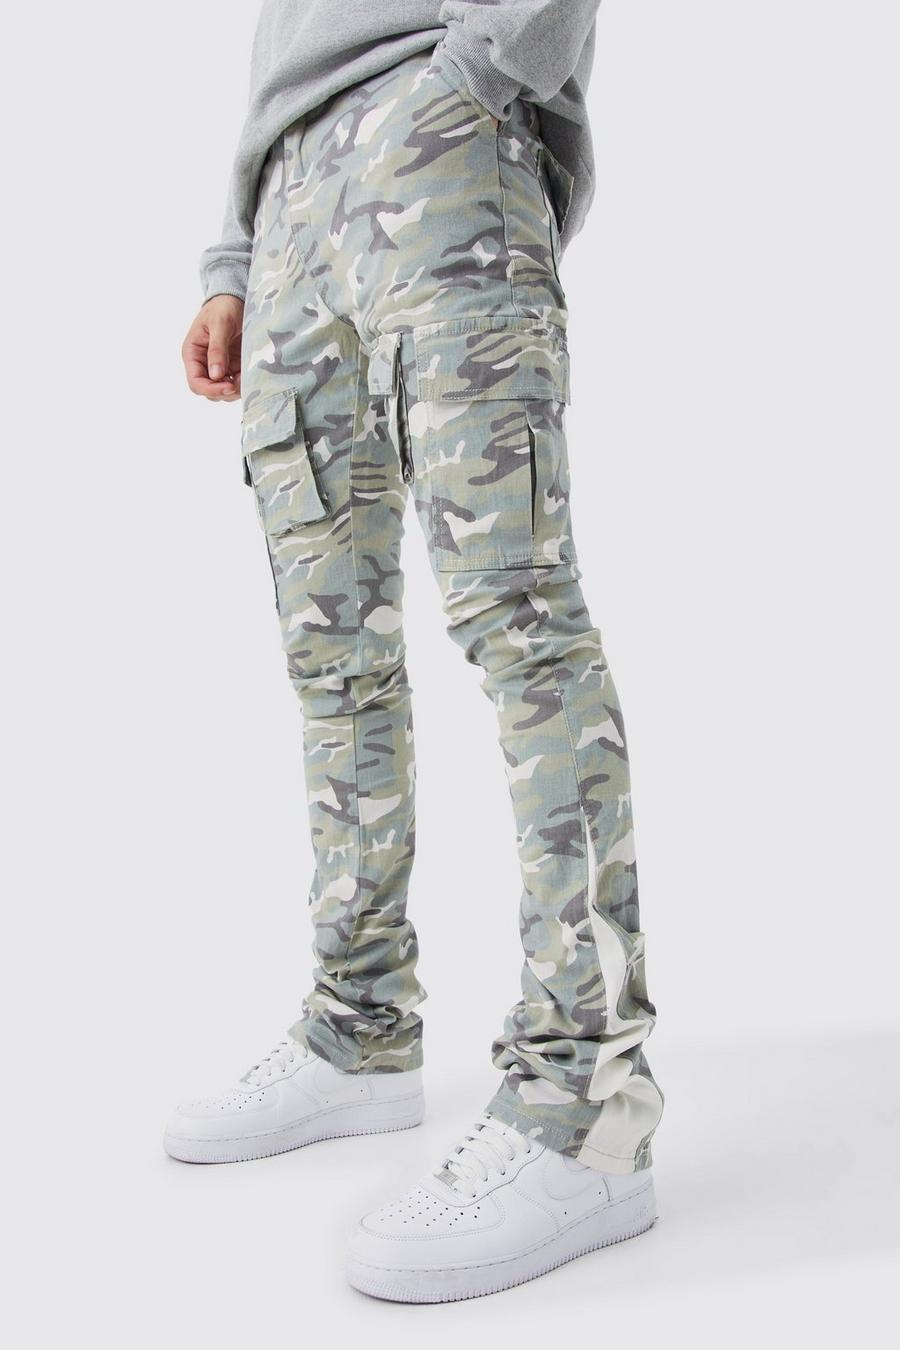 Khaki Tall Stacked Flared Camo Cargo Skinny Fit Broek Met Gusset Detail